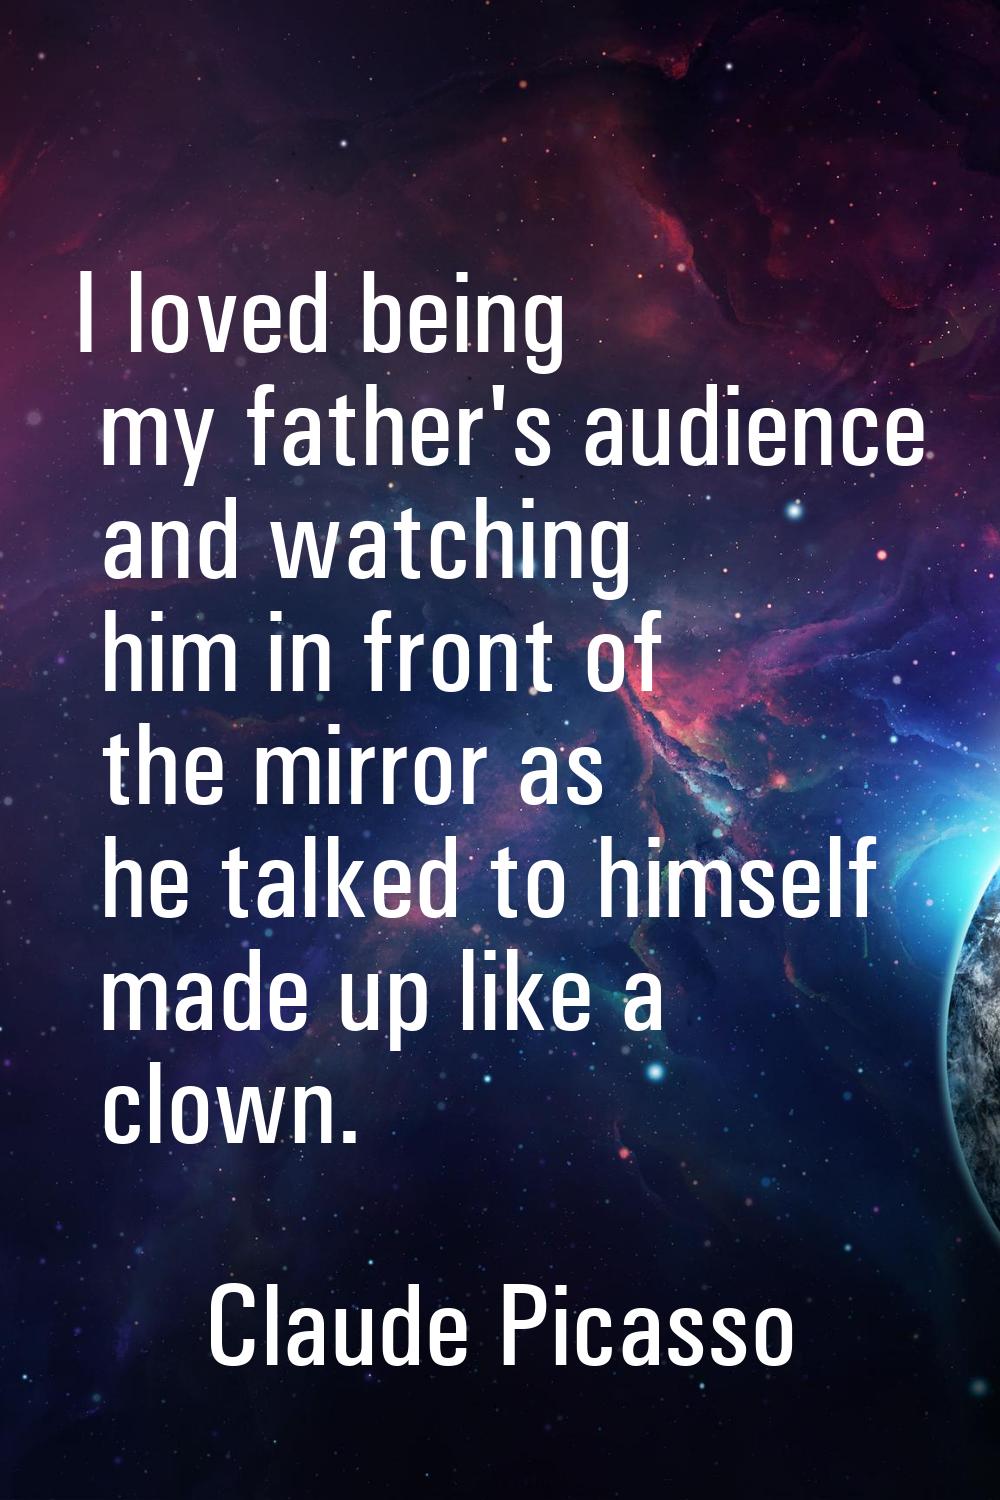 I loved being my father's audience and watching him in front of the mirror as he talked to himself 